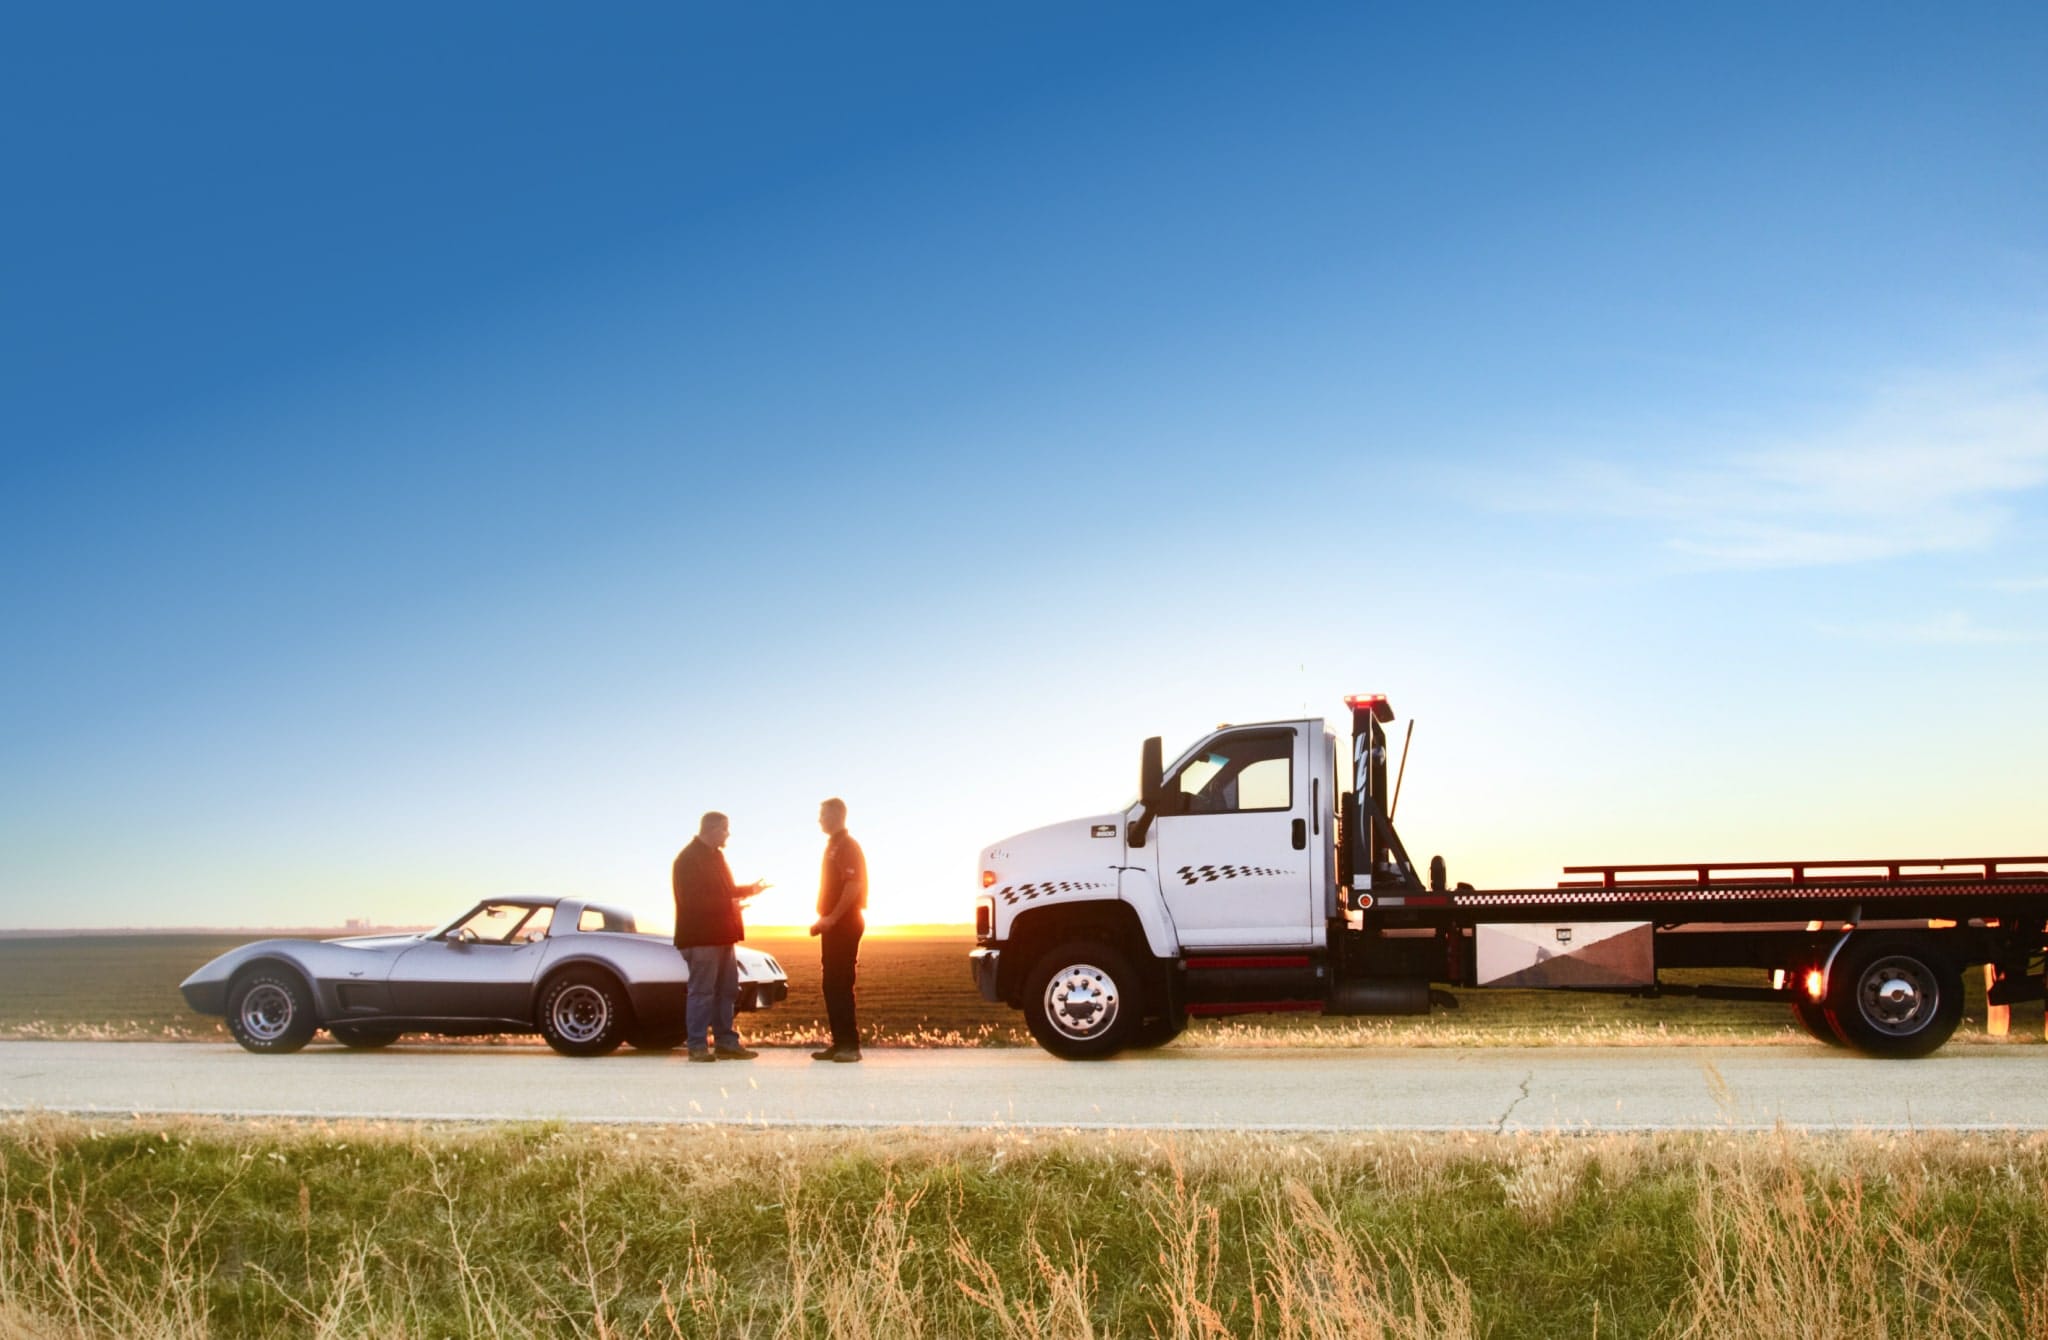 Roadside Assistance - Hagerty Drivers Club® for Classic Car